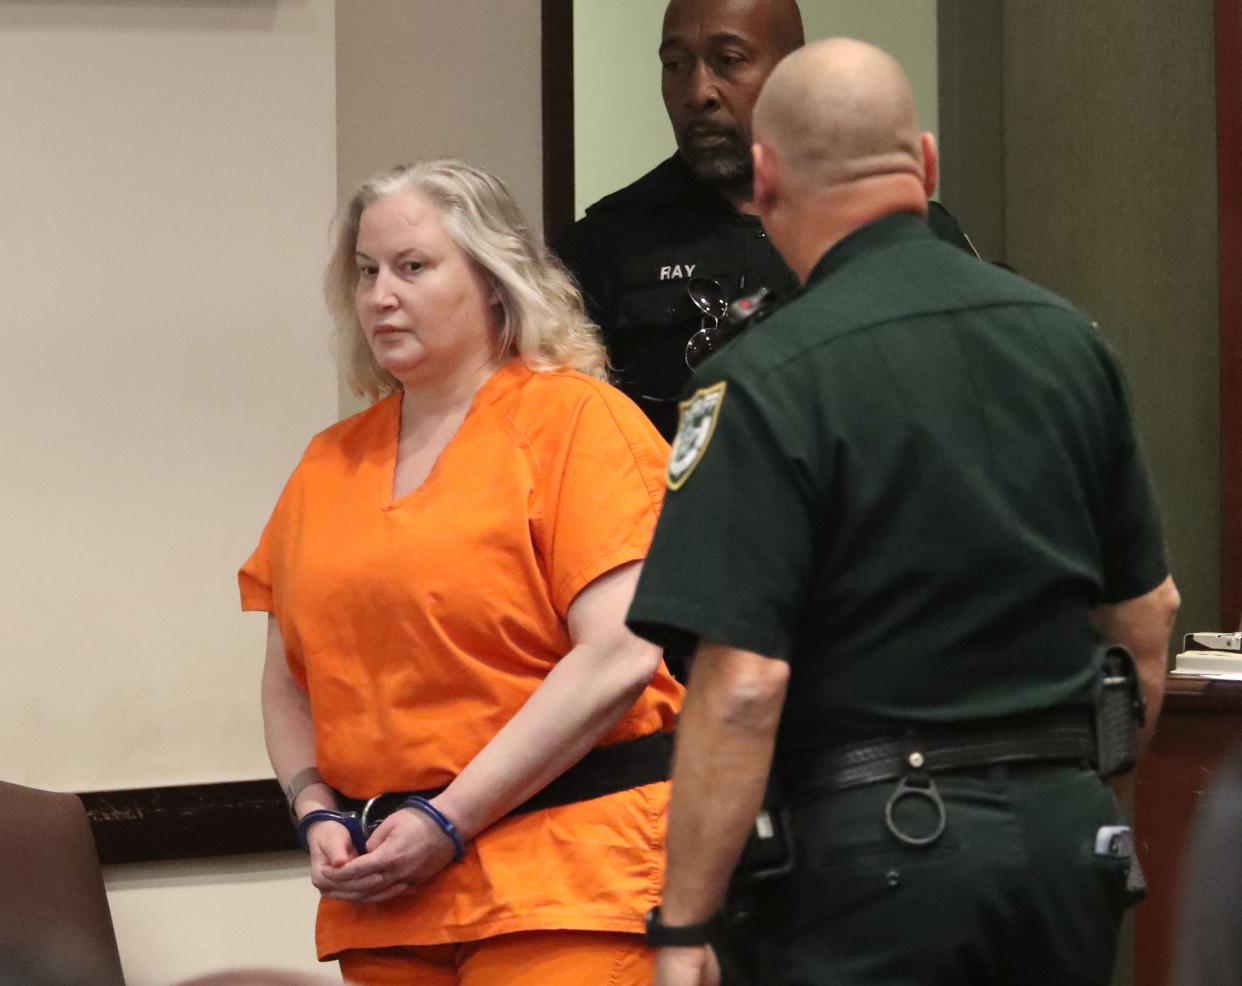 Tammy Sunny Sytch Wwe Wrestler In Dui Death Sentenced To Prison 5 Things To Know